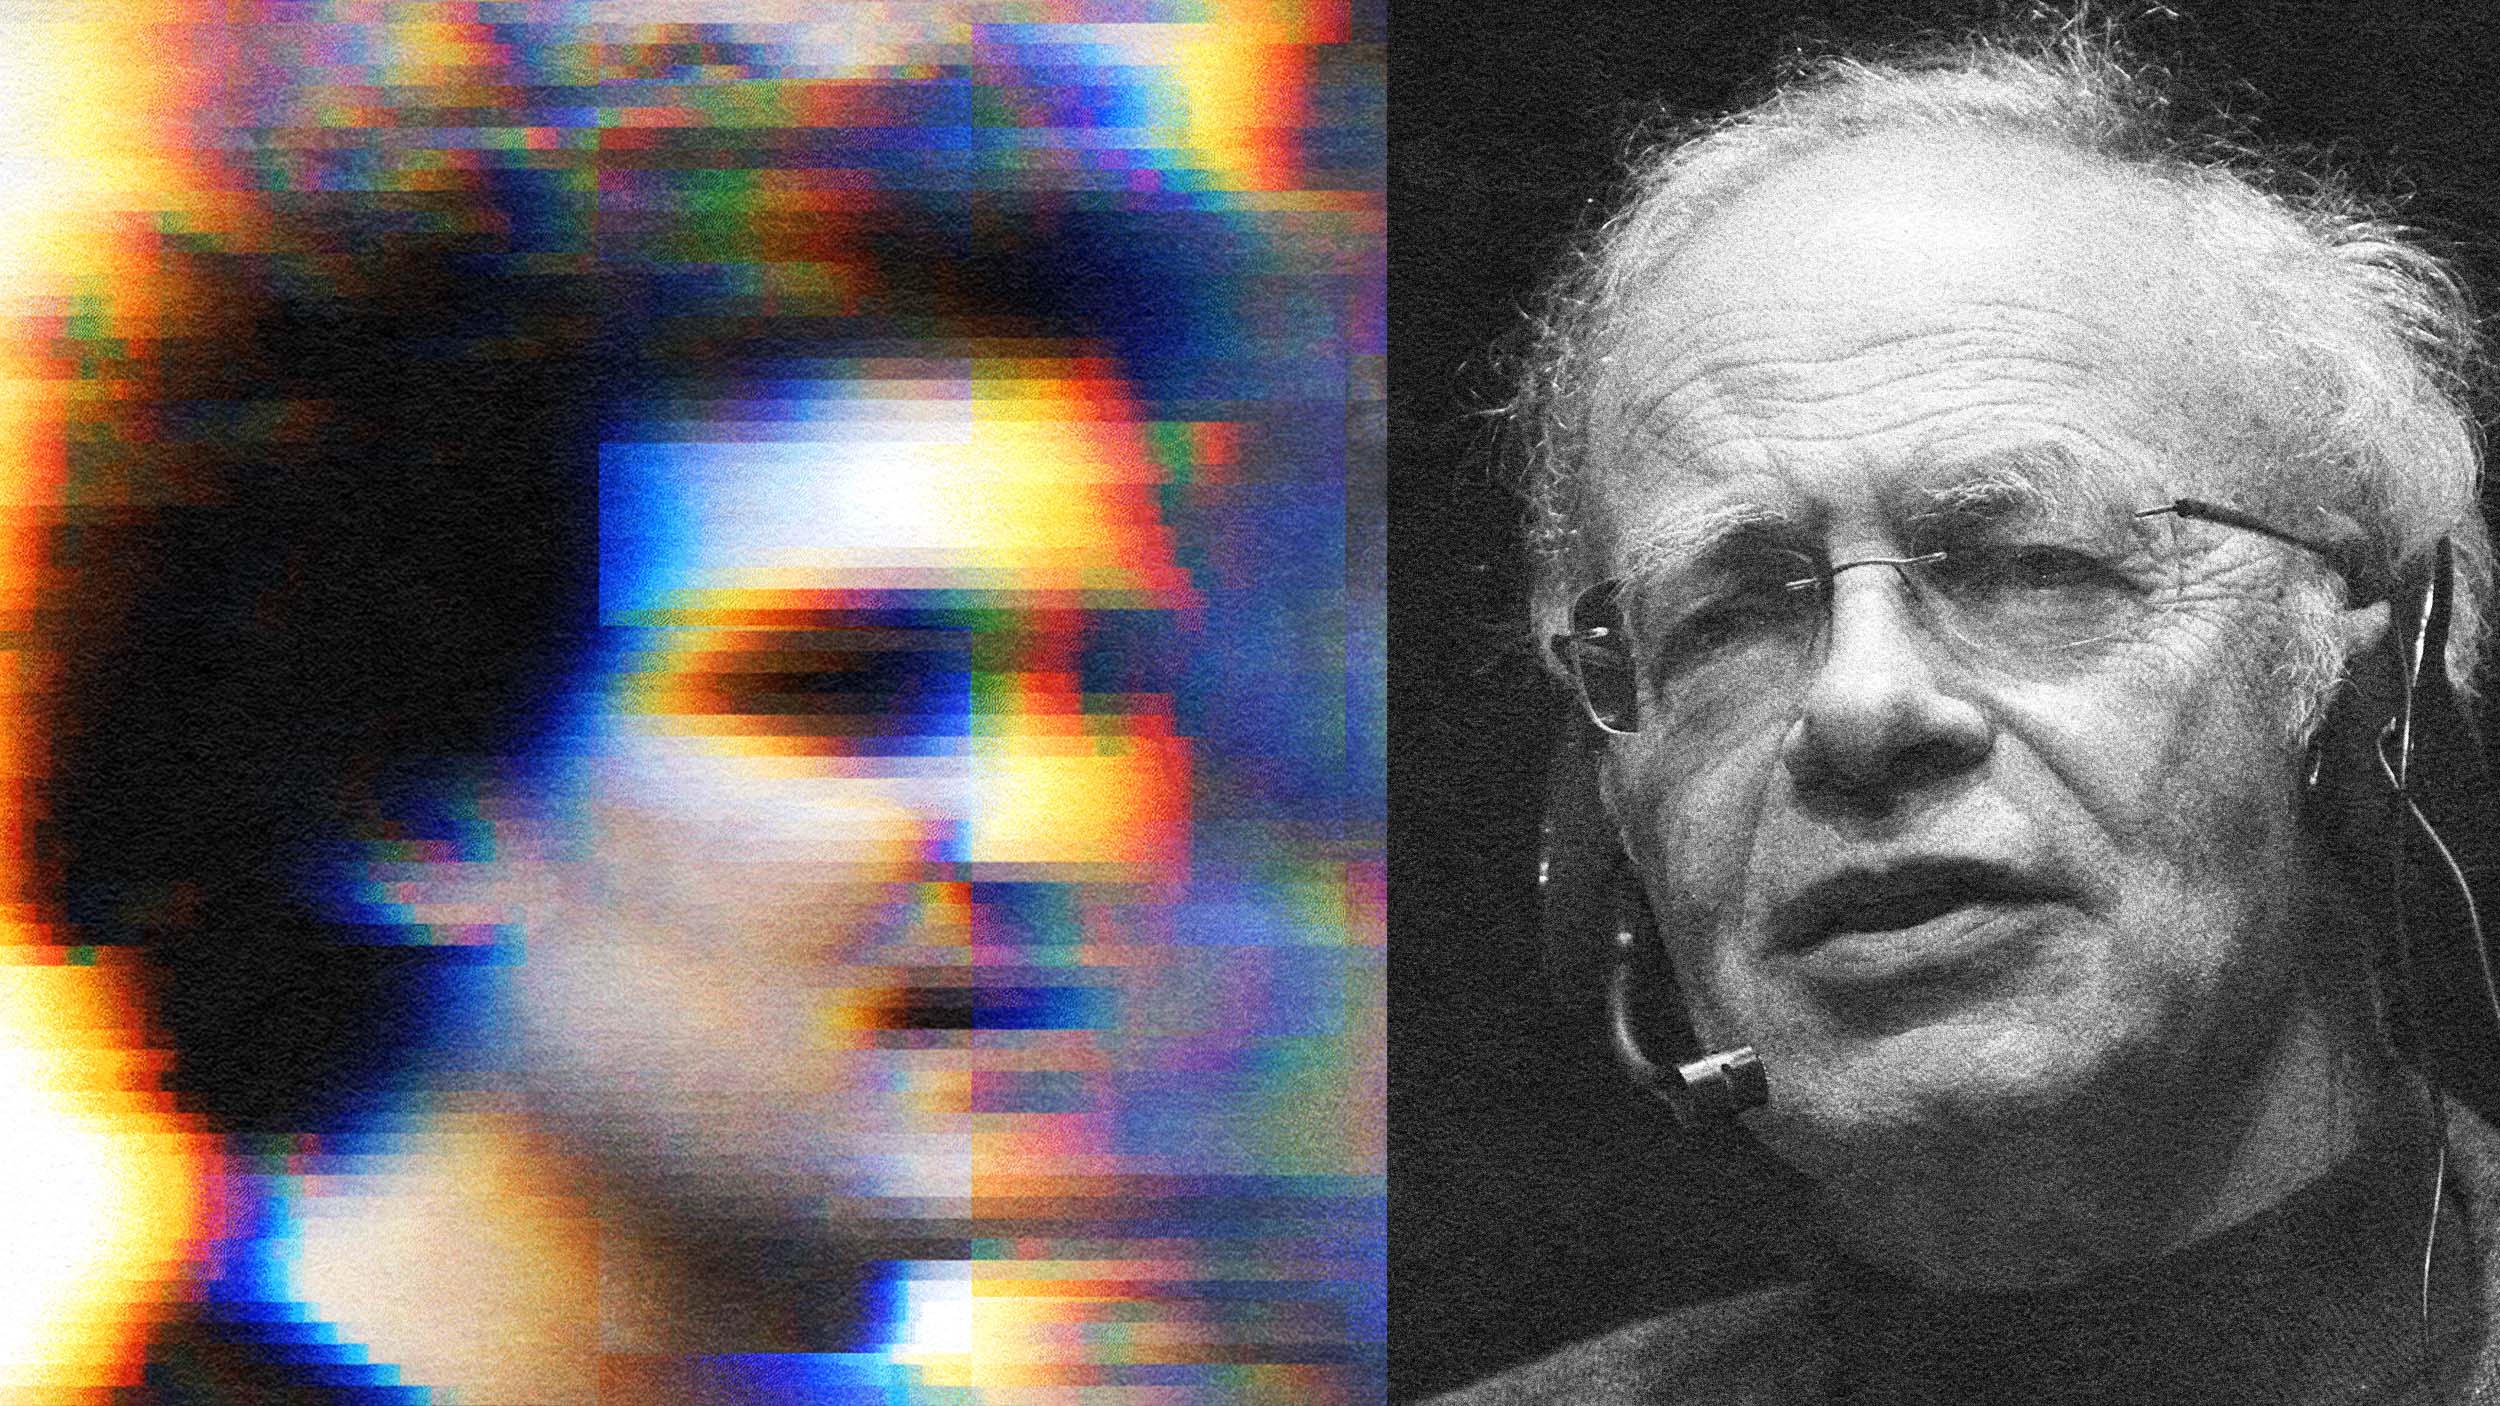 A split image with a blurred, colorful portrait of Sam Bankman-Fried on the left and Peter Singer on the right.